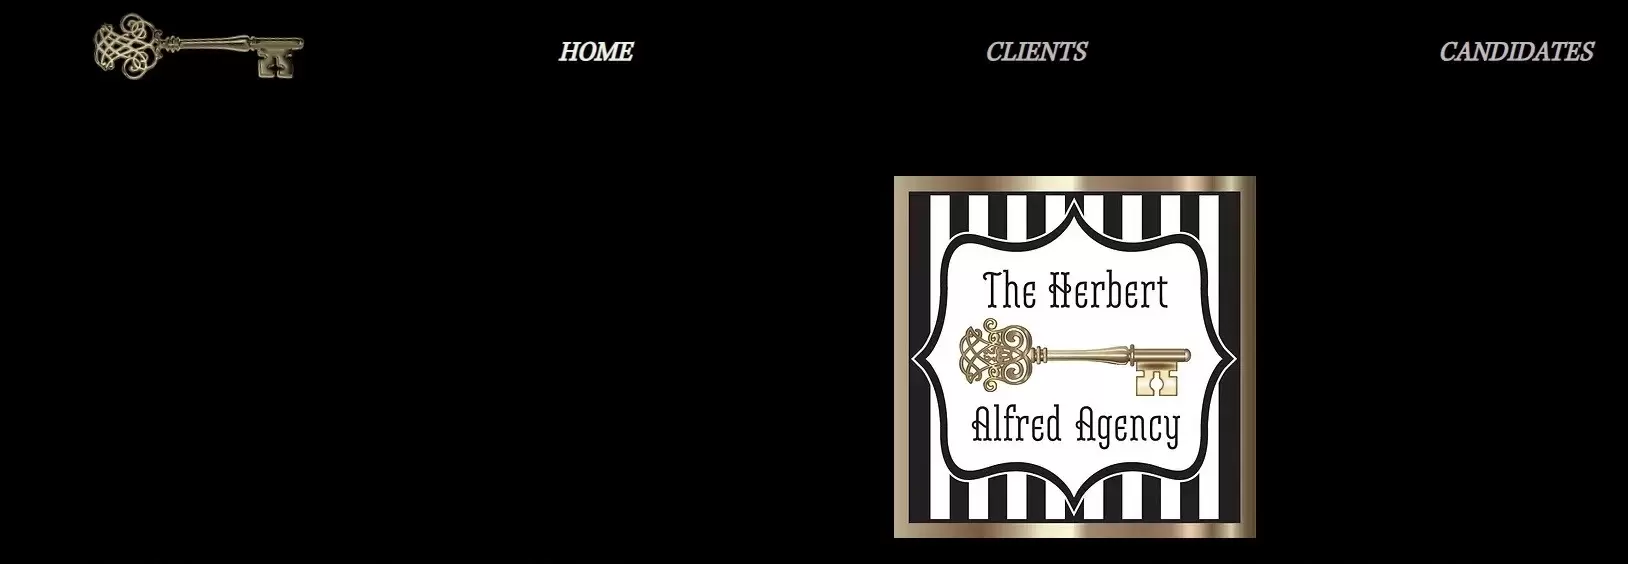 Herbert Alfred Agency: Company Profile & Reviews